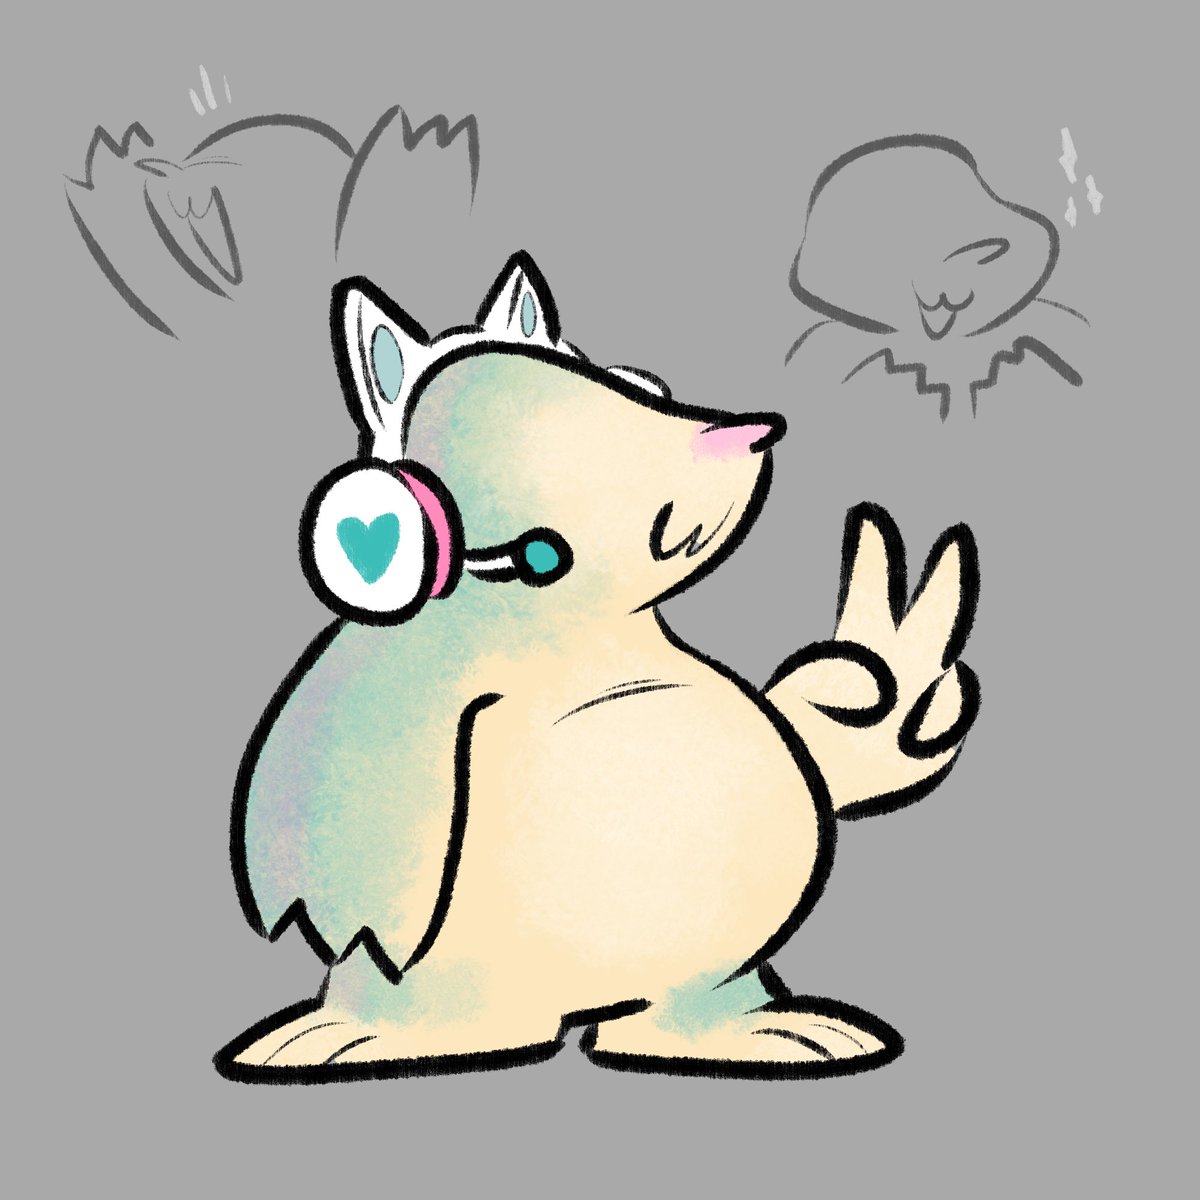 what if i make a character who's a golden mole but she enjoys wearing cat-ear headphones...